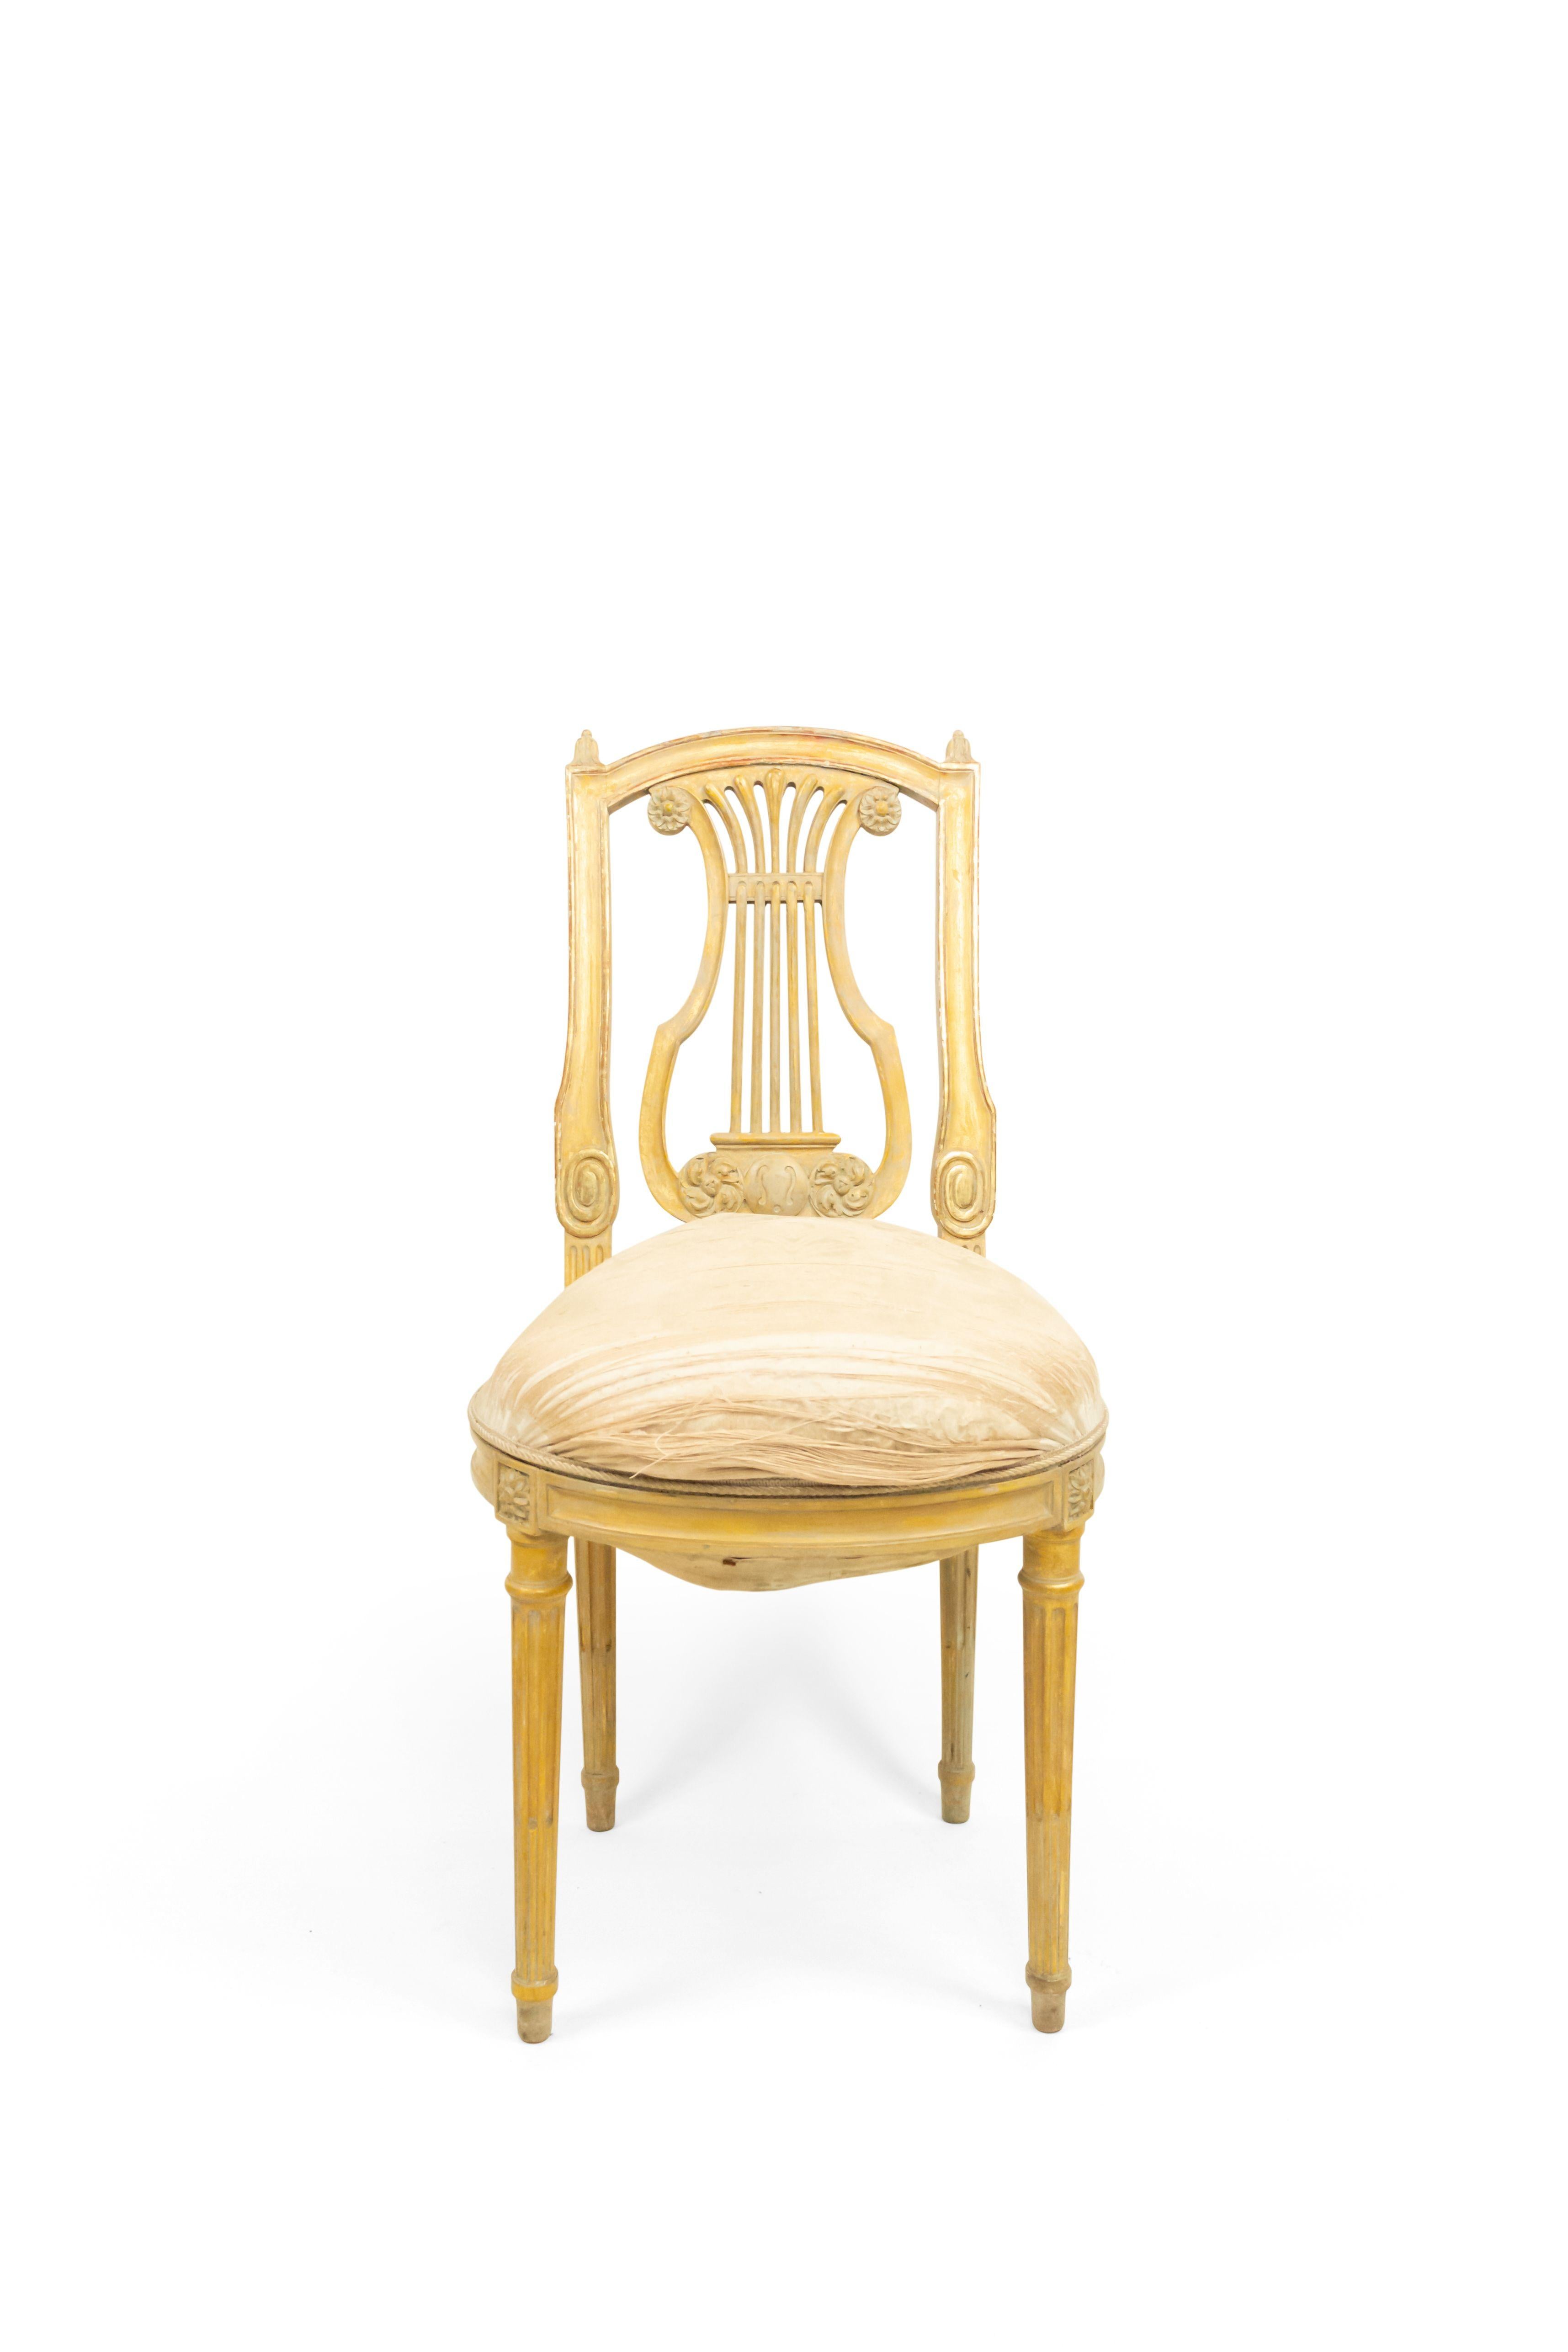 Set of 6 French Louis XVI style (19th century) white and gilt lyre back side chairs with white damask upholstery.